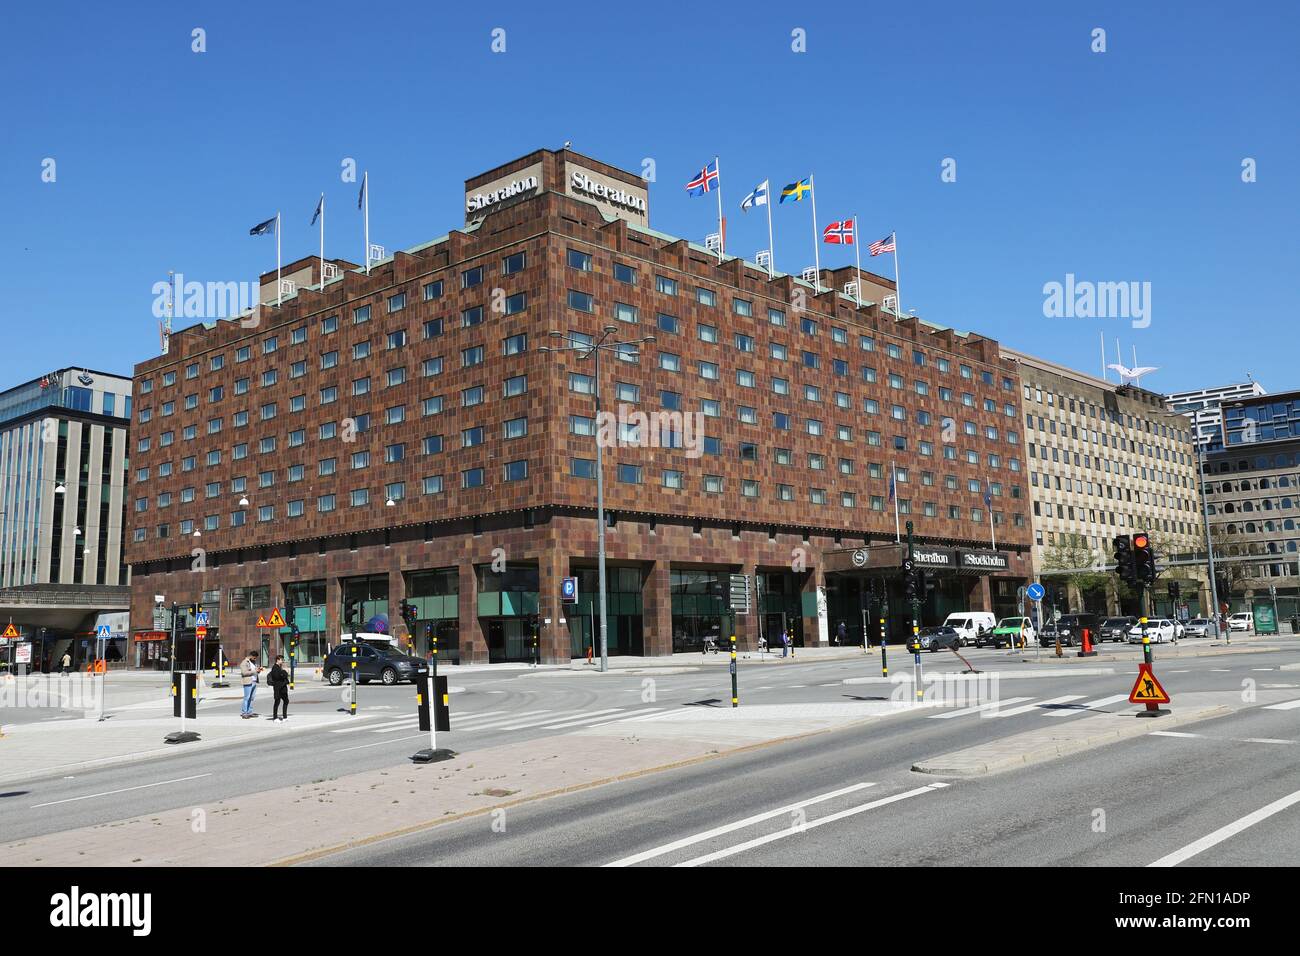 Stockholm, Sweden - May 12, 2021: Exterior view of the Sheraton Stockholm hotel. Stock Photo